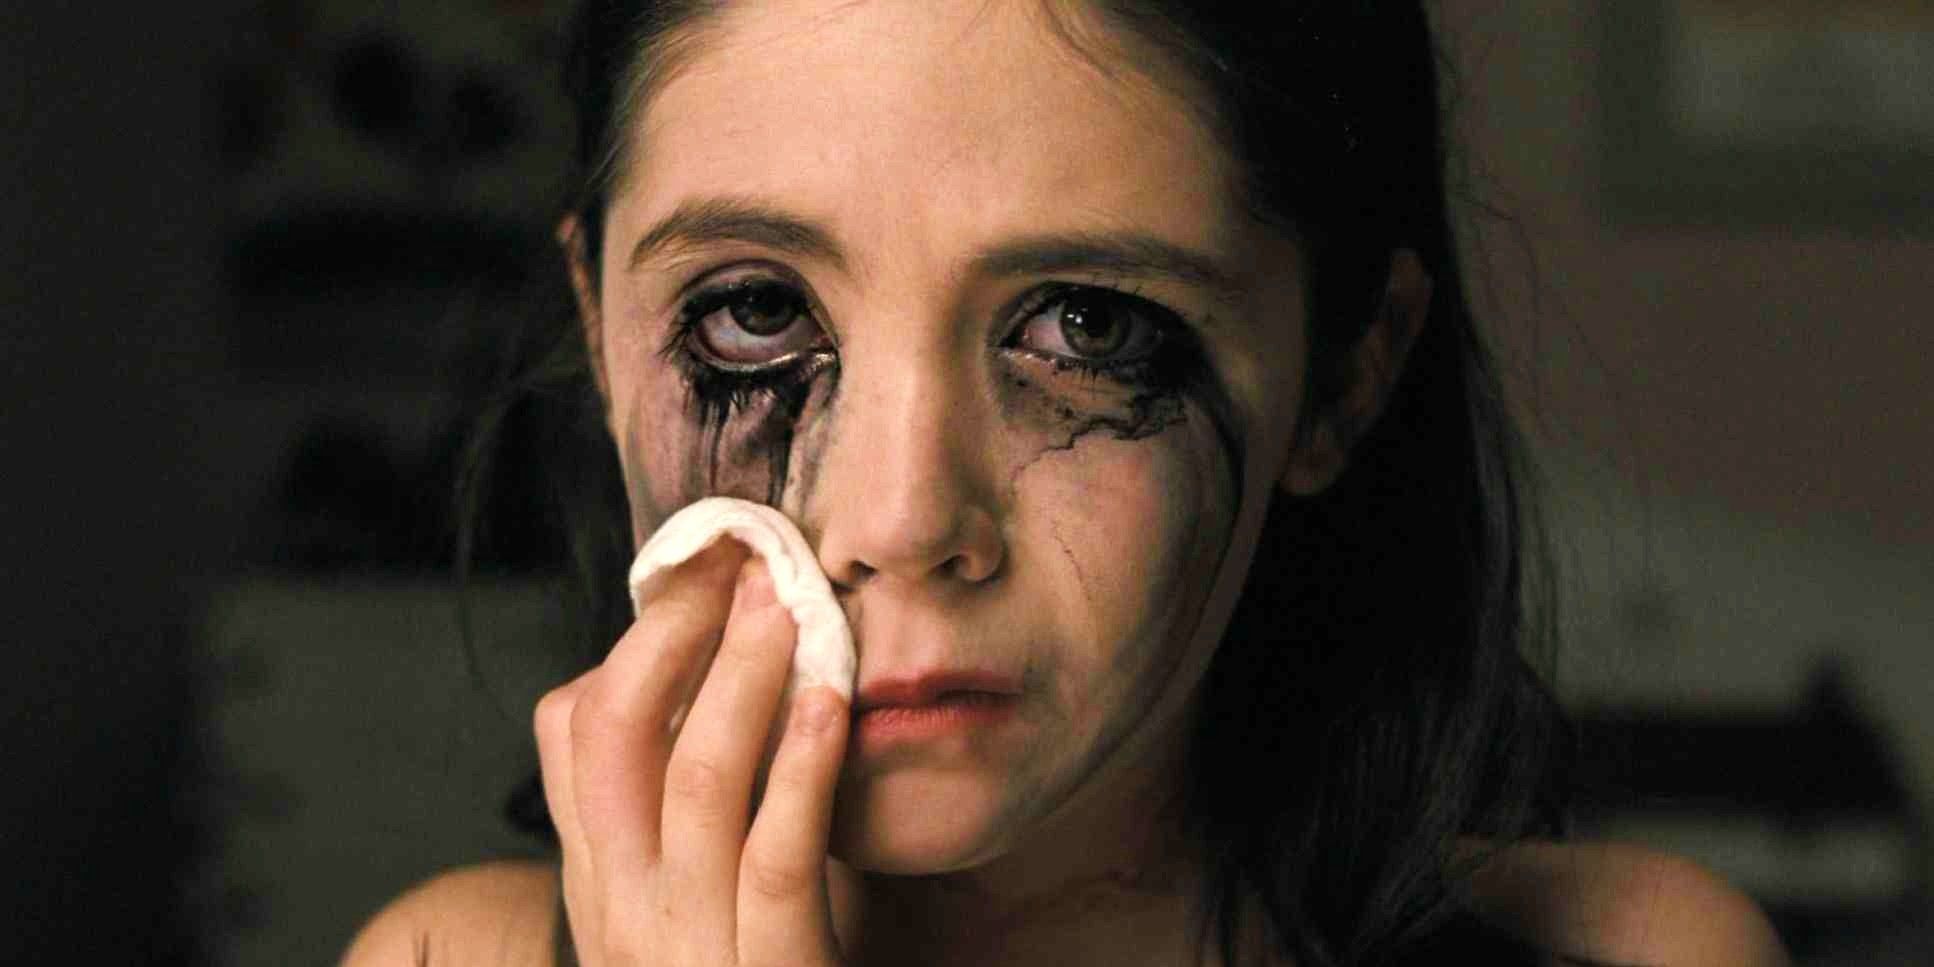 Esther wiping her makeup in Orphan